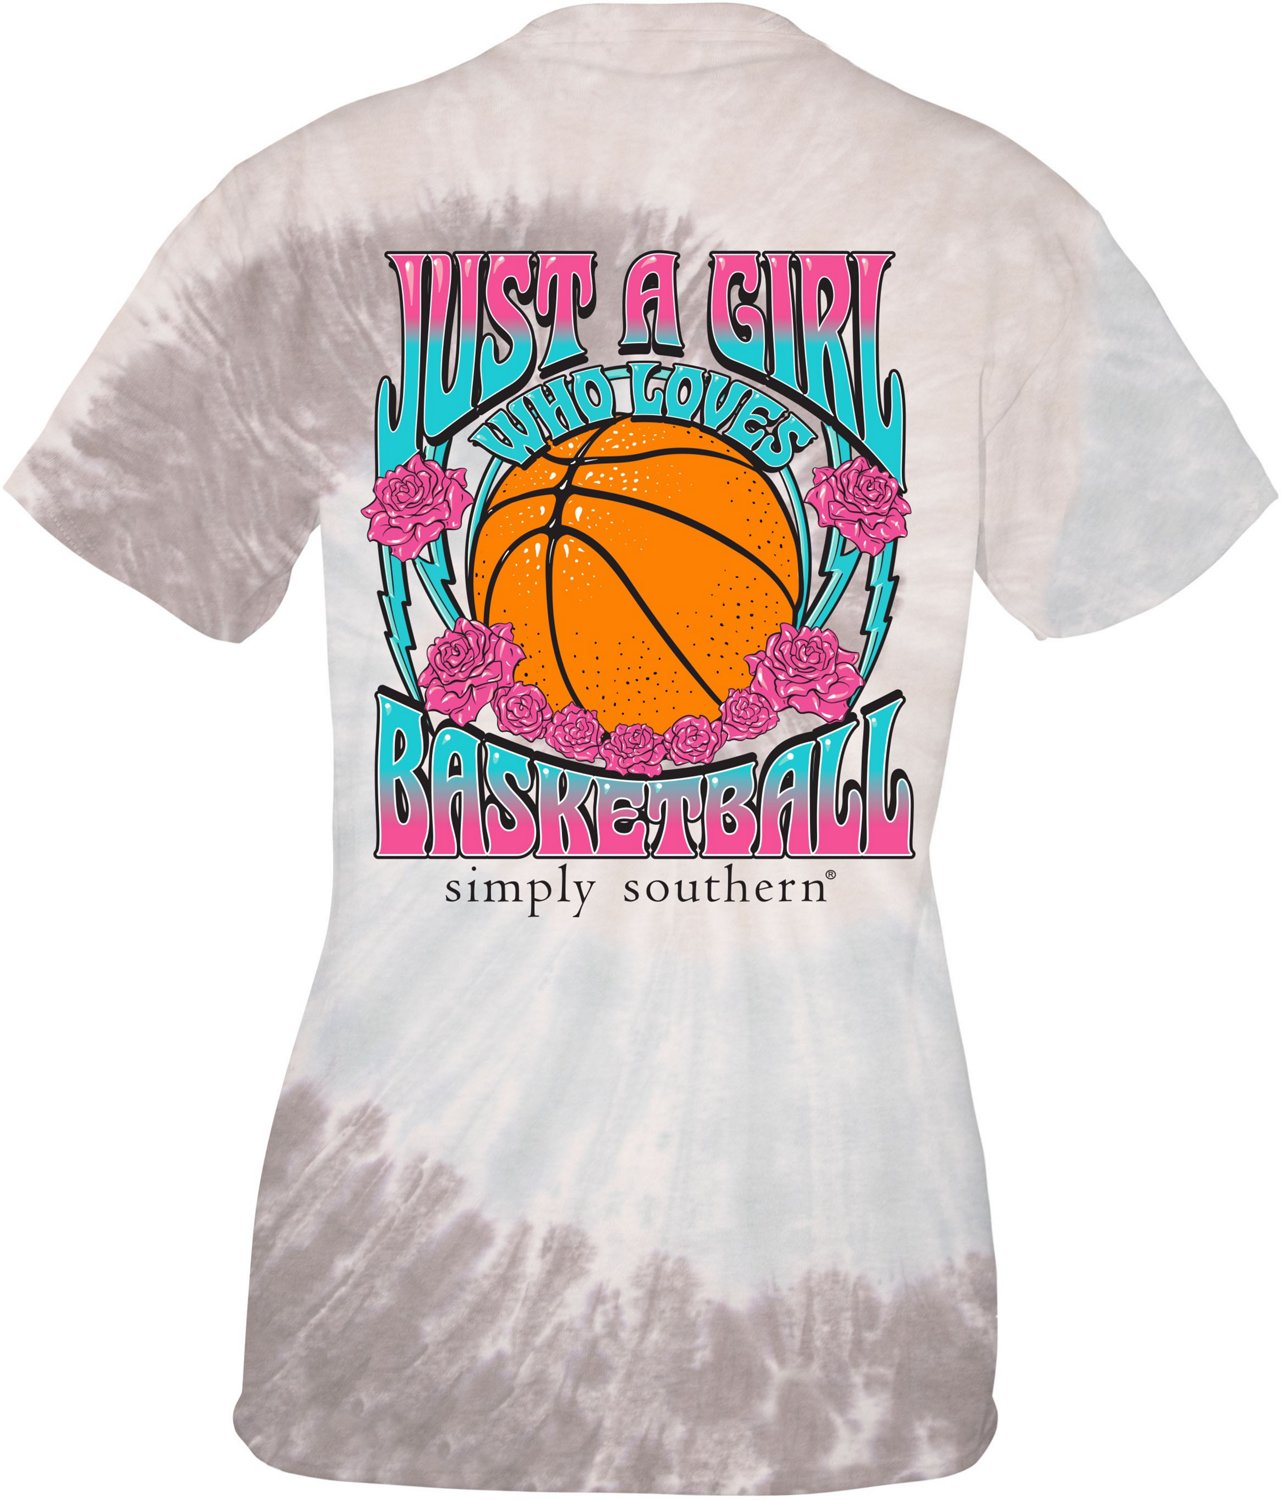 Simply Southern Women's Basketball T-shirt | Academy